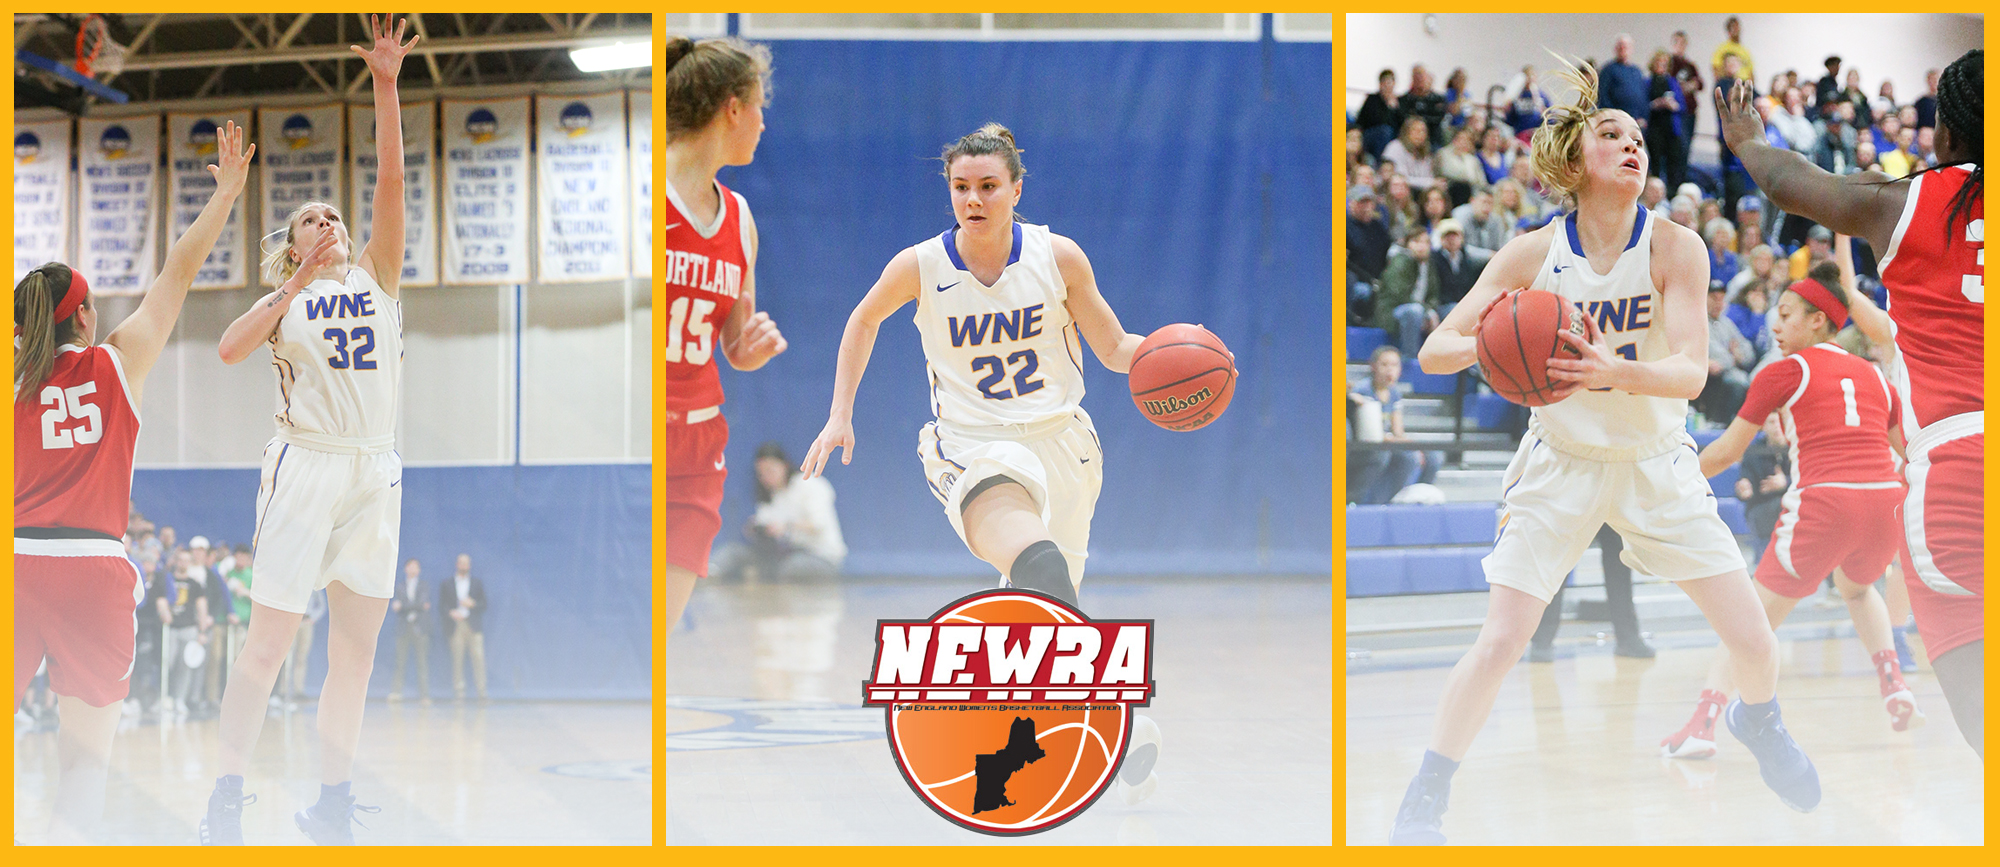 Emily Farrell, Meghan Orbann, and Courtney Carlson Selected to Play in NEWBA Senior All-Star Classic while Farrell Earns All-Region Honors